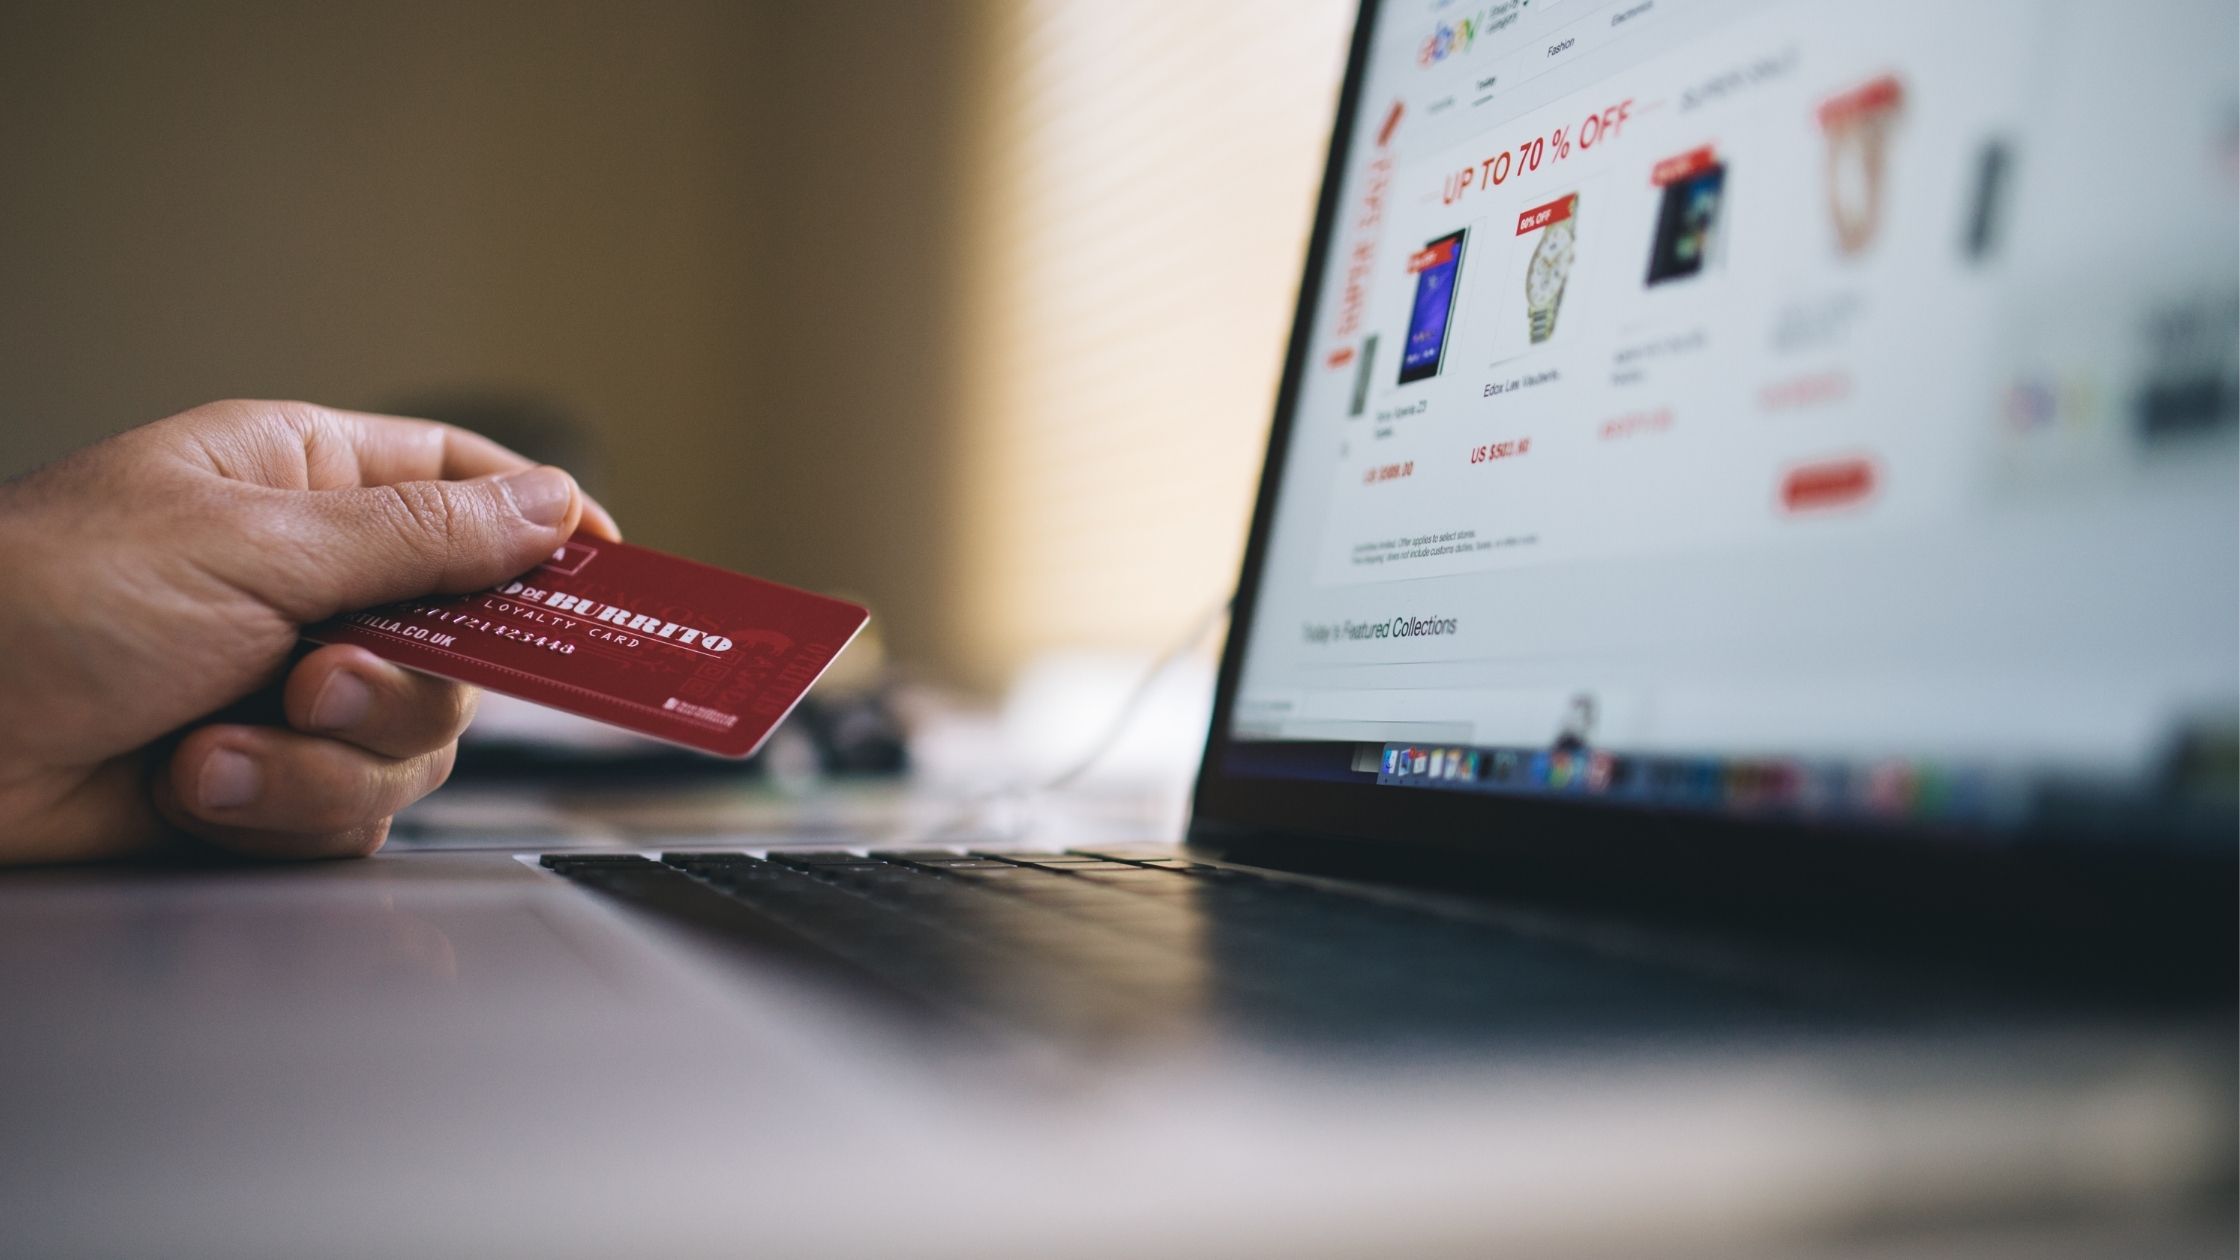 Six Significant Things to Consider When Shopping Online